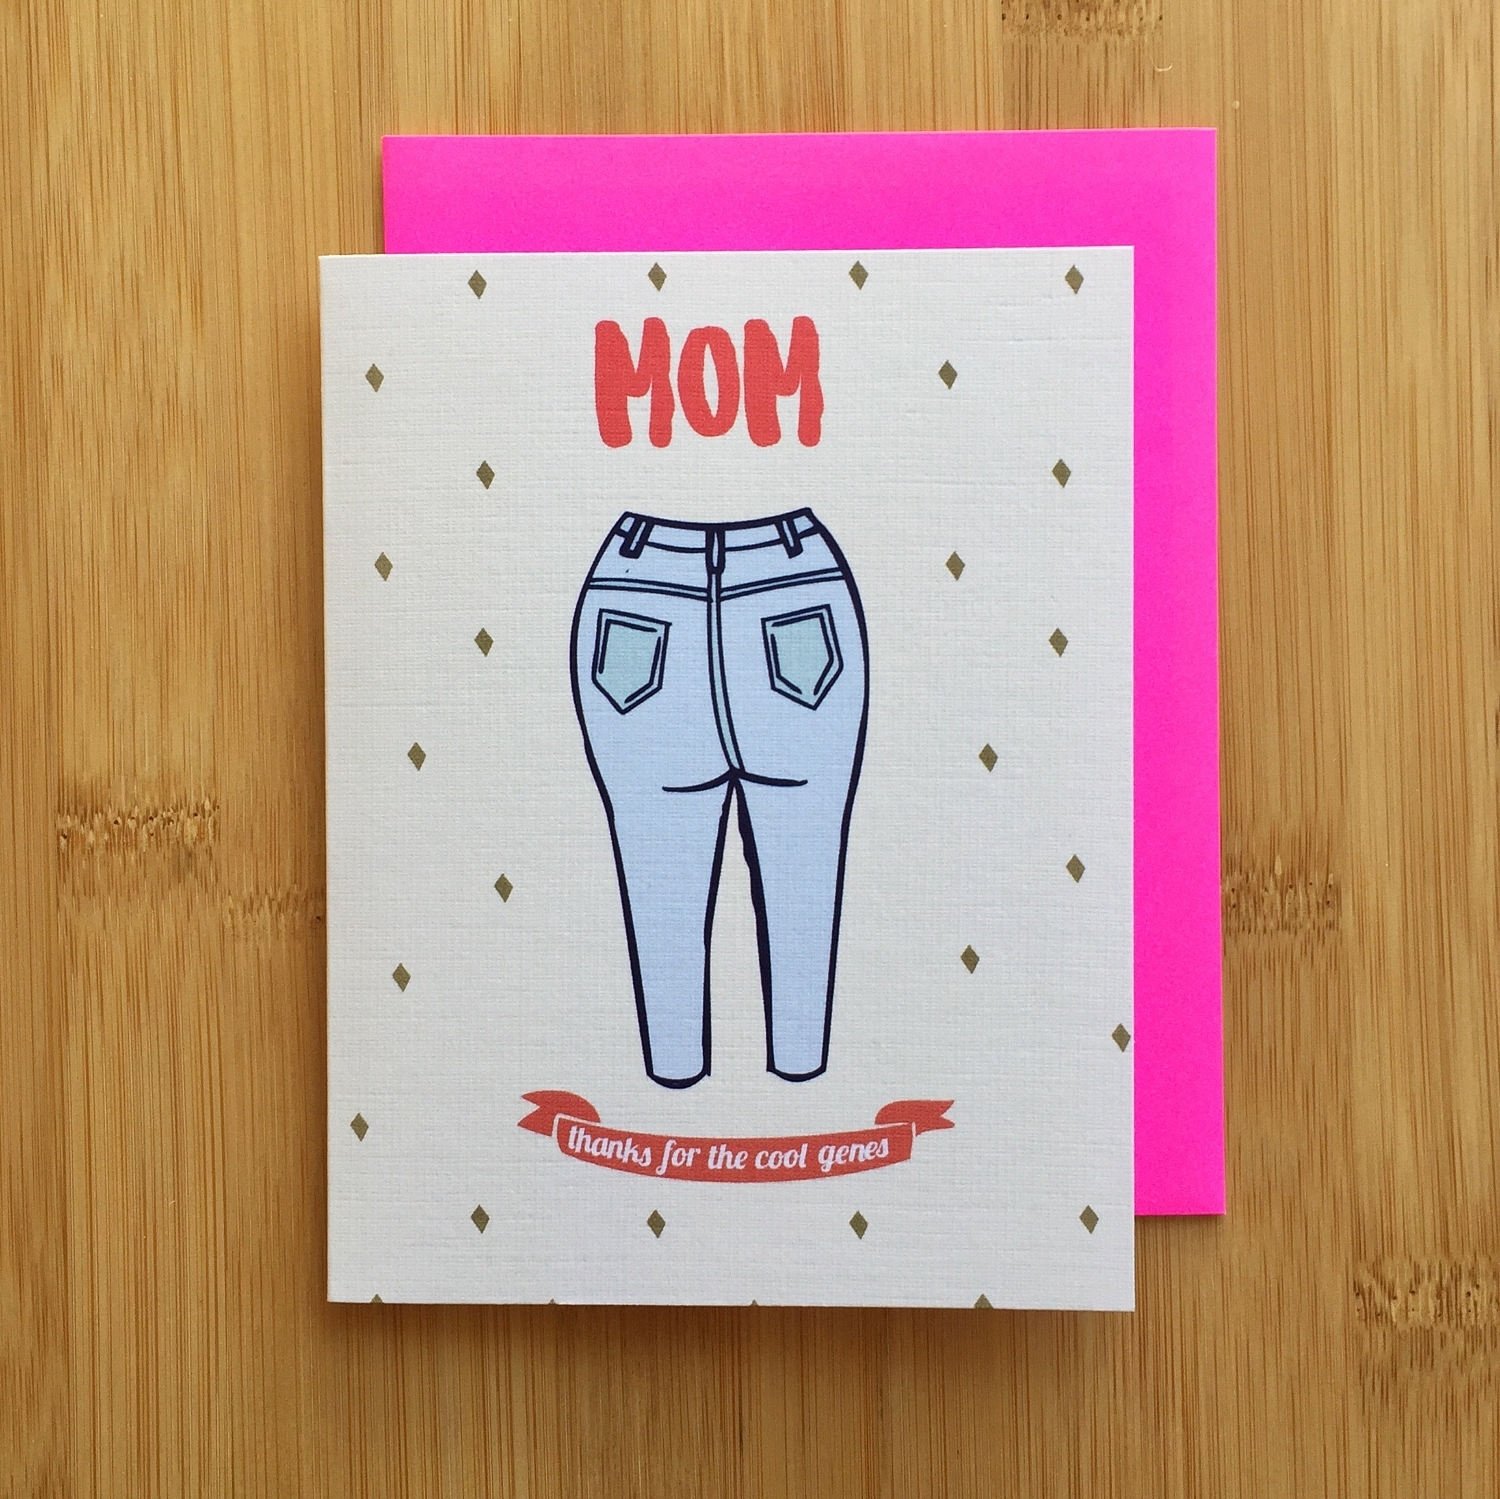 10 Most Popular Birthday Card For Mom Ideas funny birthday cards for mom design with mom jeans illustration and 1 2022